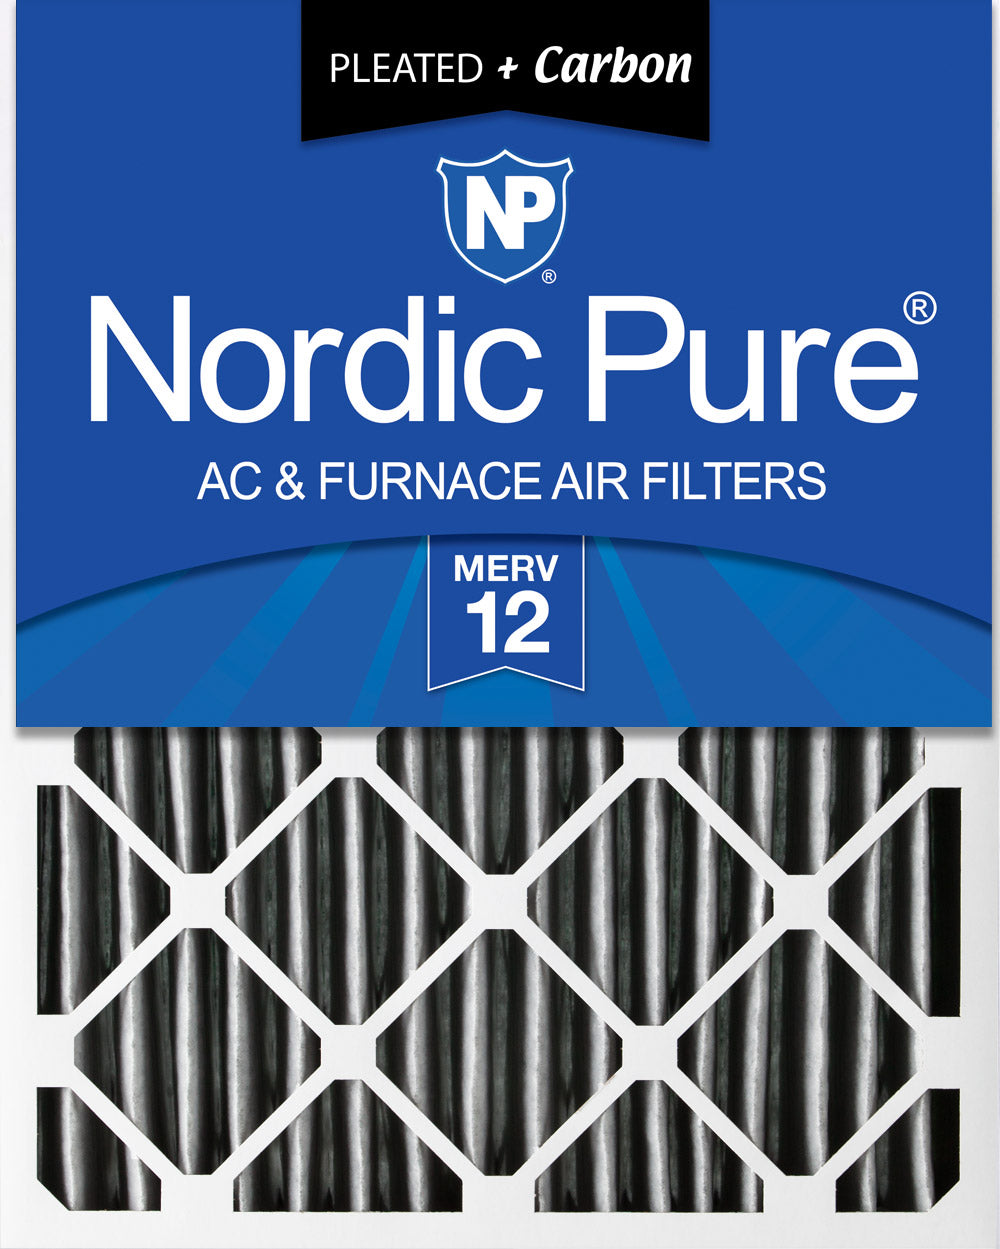 20x25x4 (3 5/8) Furnace Air Filters MERV 12 Pleated Plus Carbon